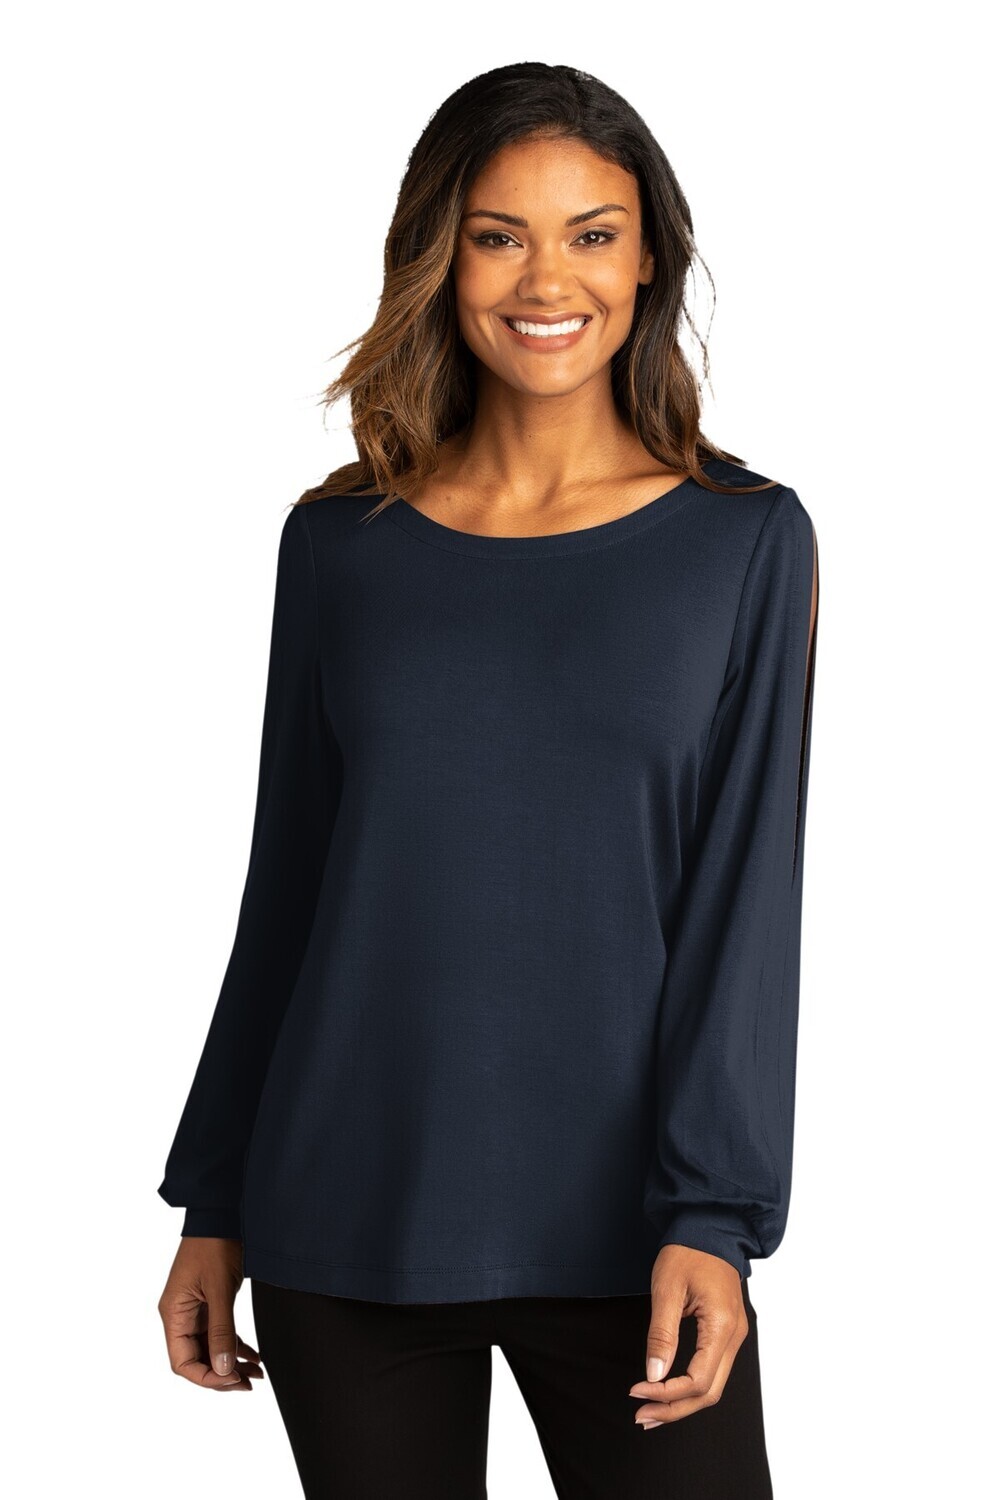 PORT AUTHORITY LADIES LUXE KNIT TOP (LK5600) RIVER NAVY BLUE - LARGE